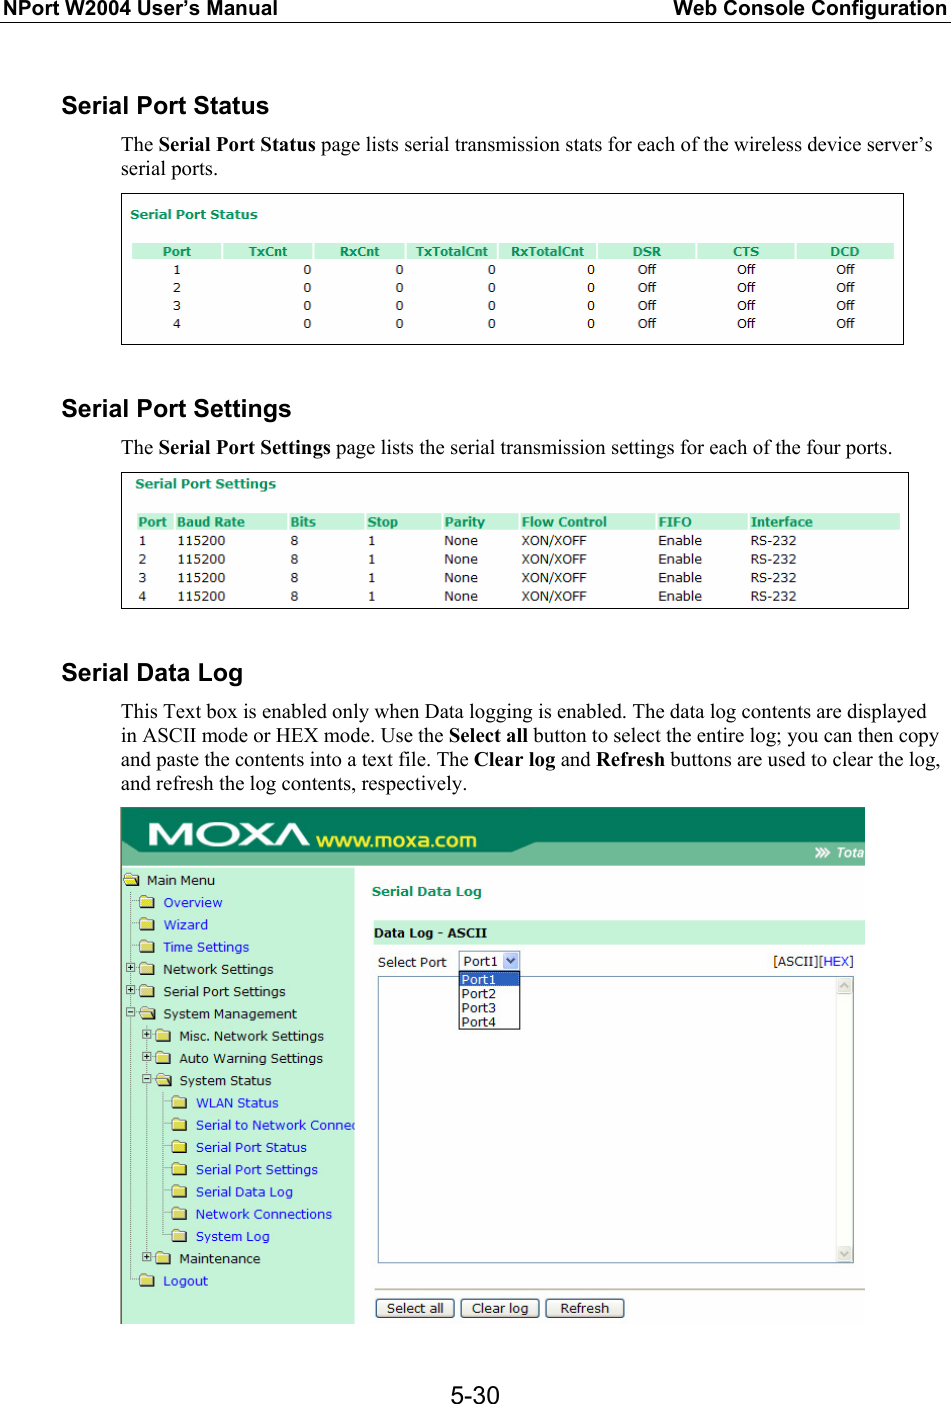 NPort W2004 User’s Manual  Web Console Configuration  5-30 Serial Port Status The Serial Port Status page lists serial transmission stats for each of the wireless device server’s serial ports.   Serial Port Settings The Serial Port Settings page lists the serial transmission settings for each of the four ports.   Serial Data Log This Text box is enabled only when Data logging is enabled. The data log contents are displayed in ASCII mode or HEX mode. Use the Select all button to select the entire log; you can then copy and paste the contents into a text file. The Clear log and Refresh buttons are used to clear the log, and refresh the log contents, respectively.  